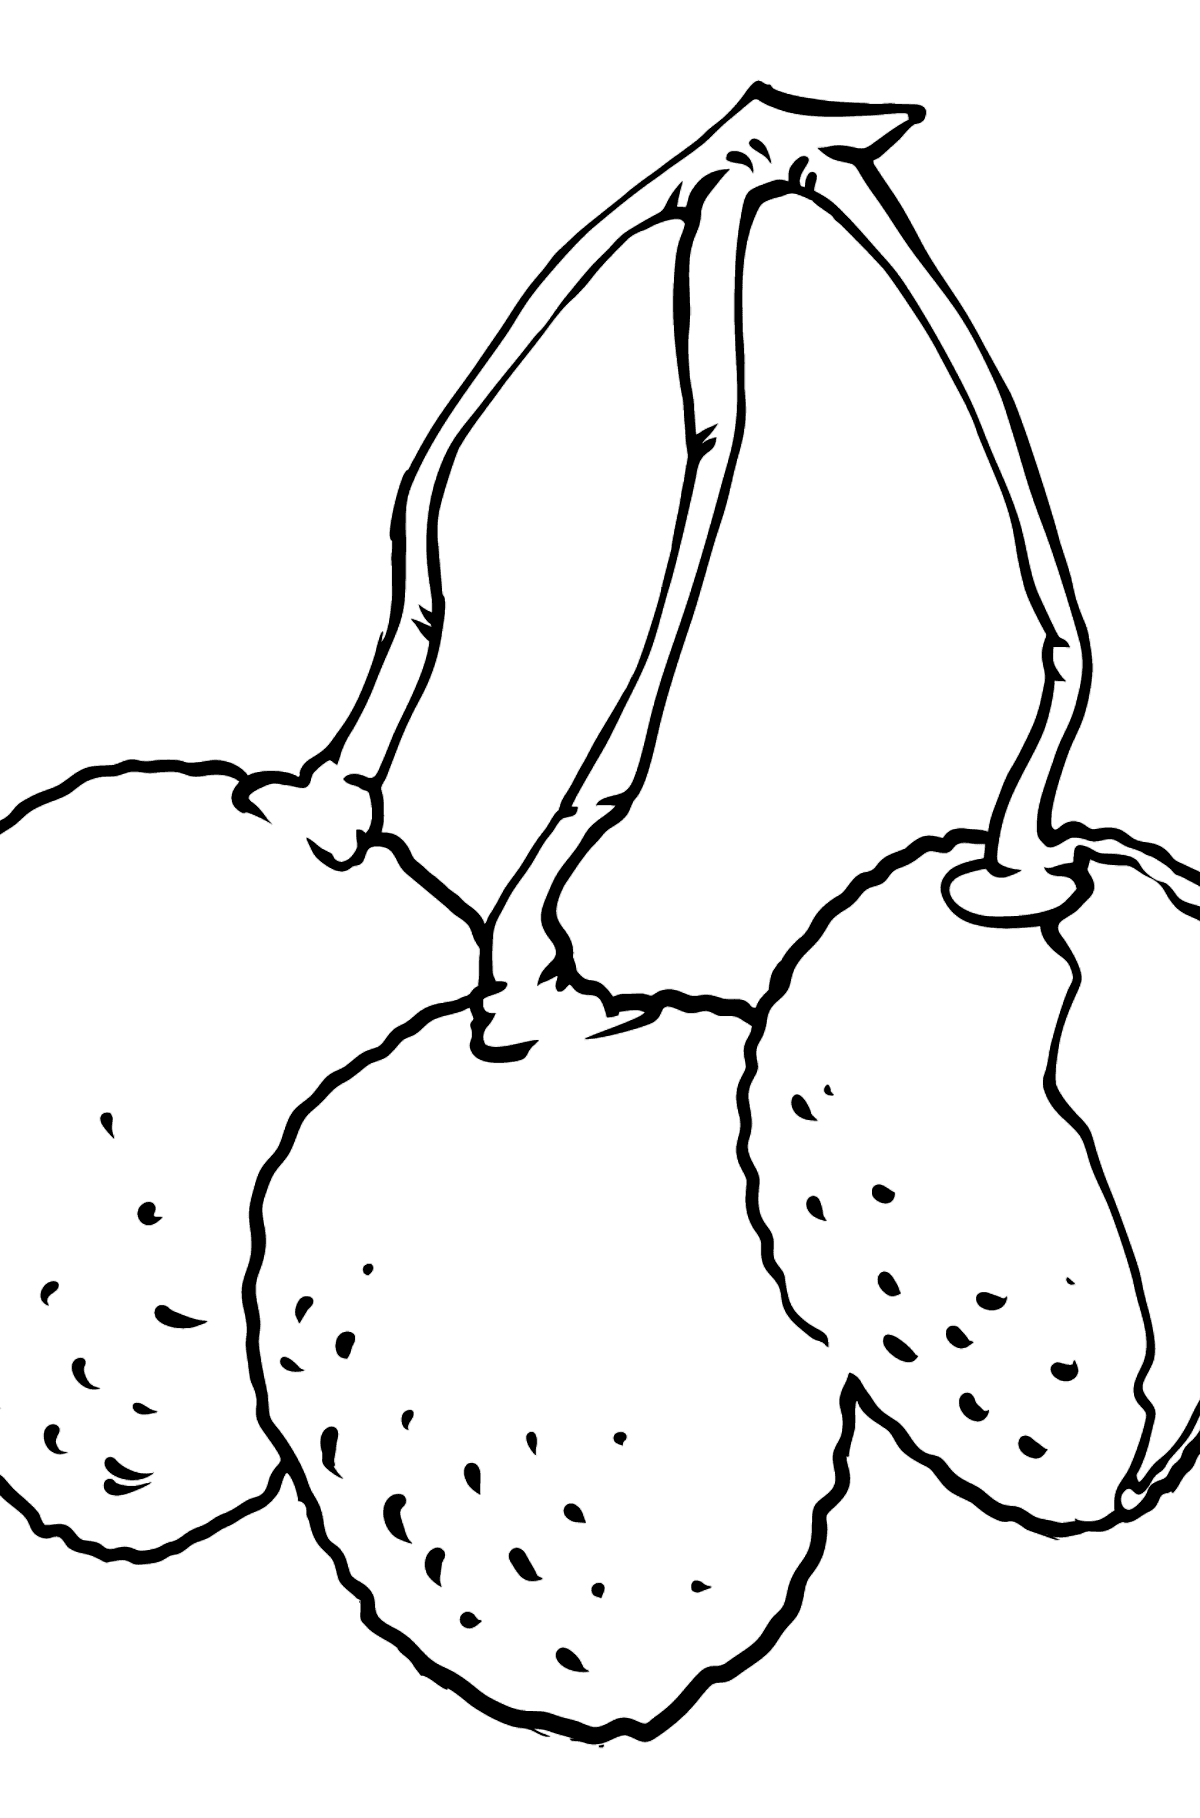 Lychee coloring page - Coloring Pages for Kids